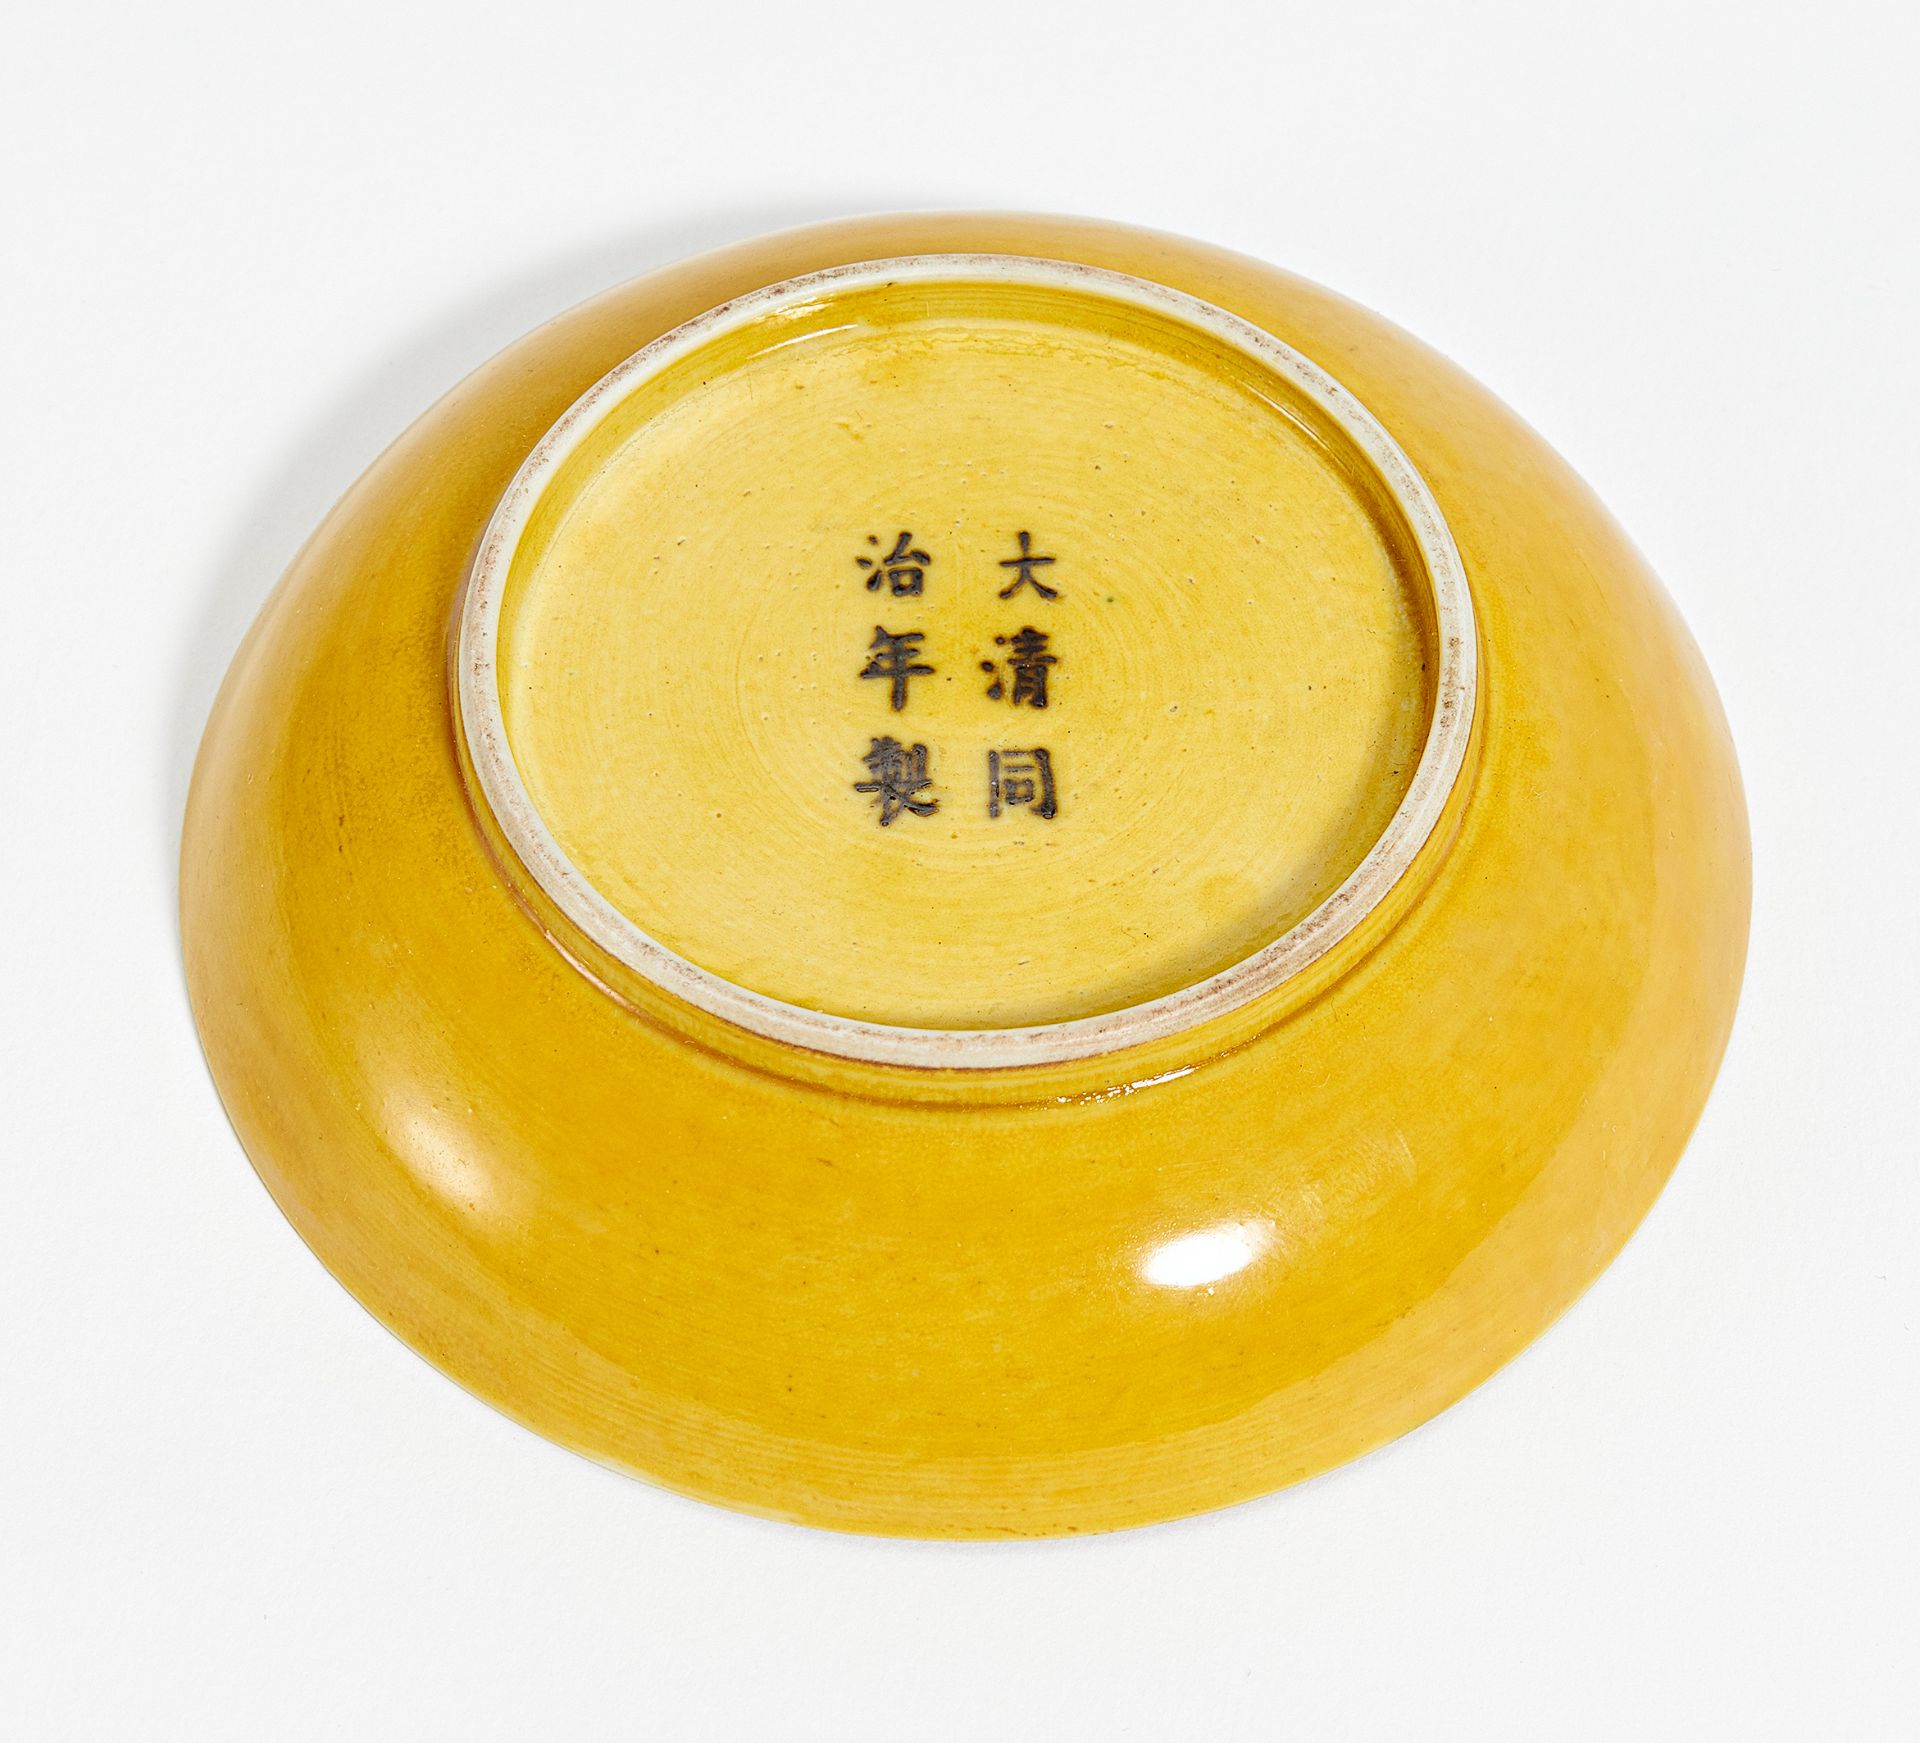 SMALL YELLOW-GLAZED DISH. China. Qing Dynasty. Tongzhi period (1861-1875). Porcelain, inside and - Image 2 of 2